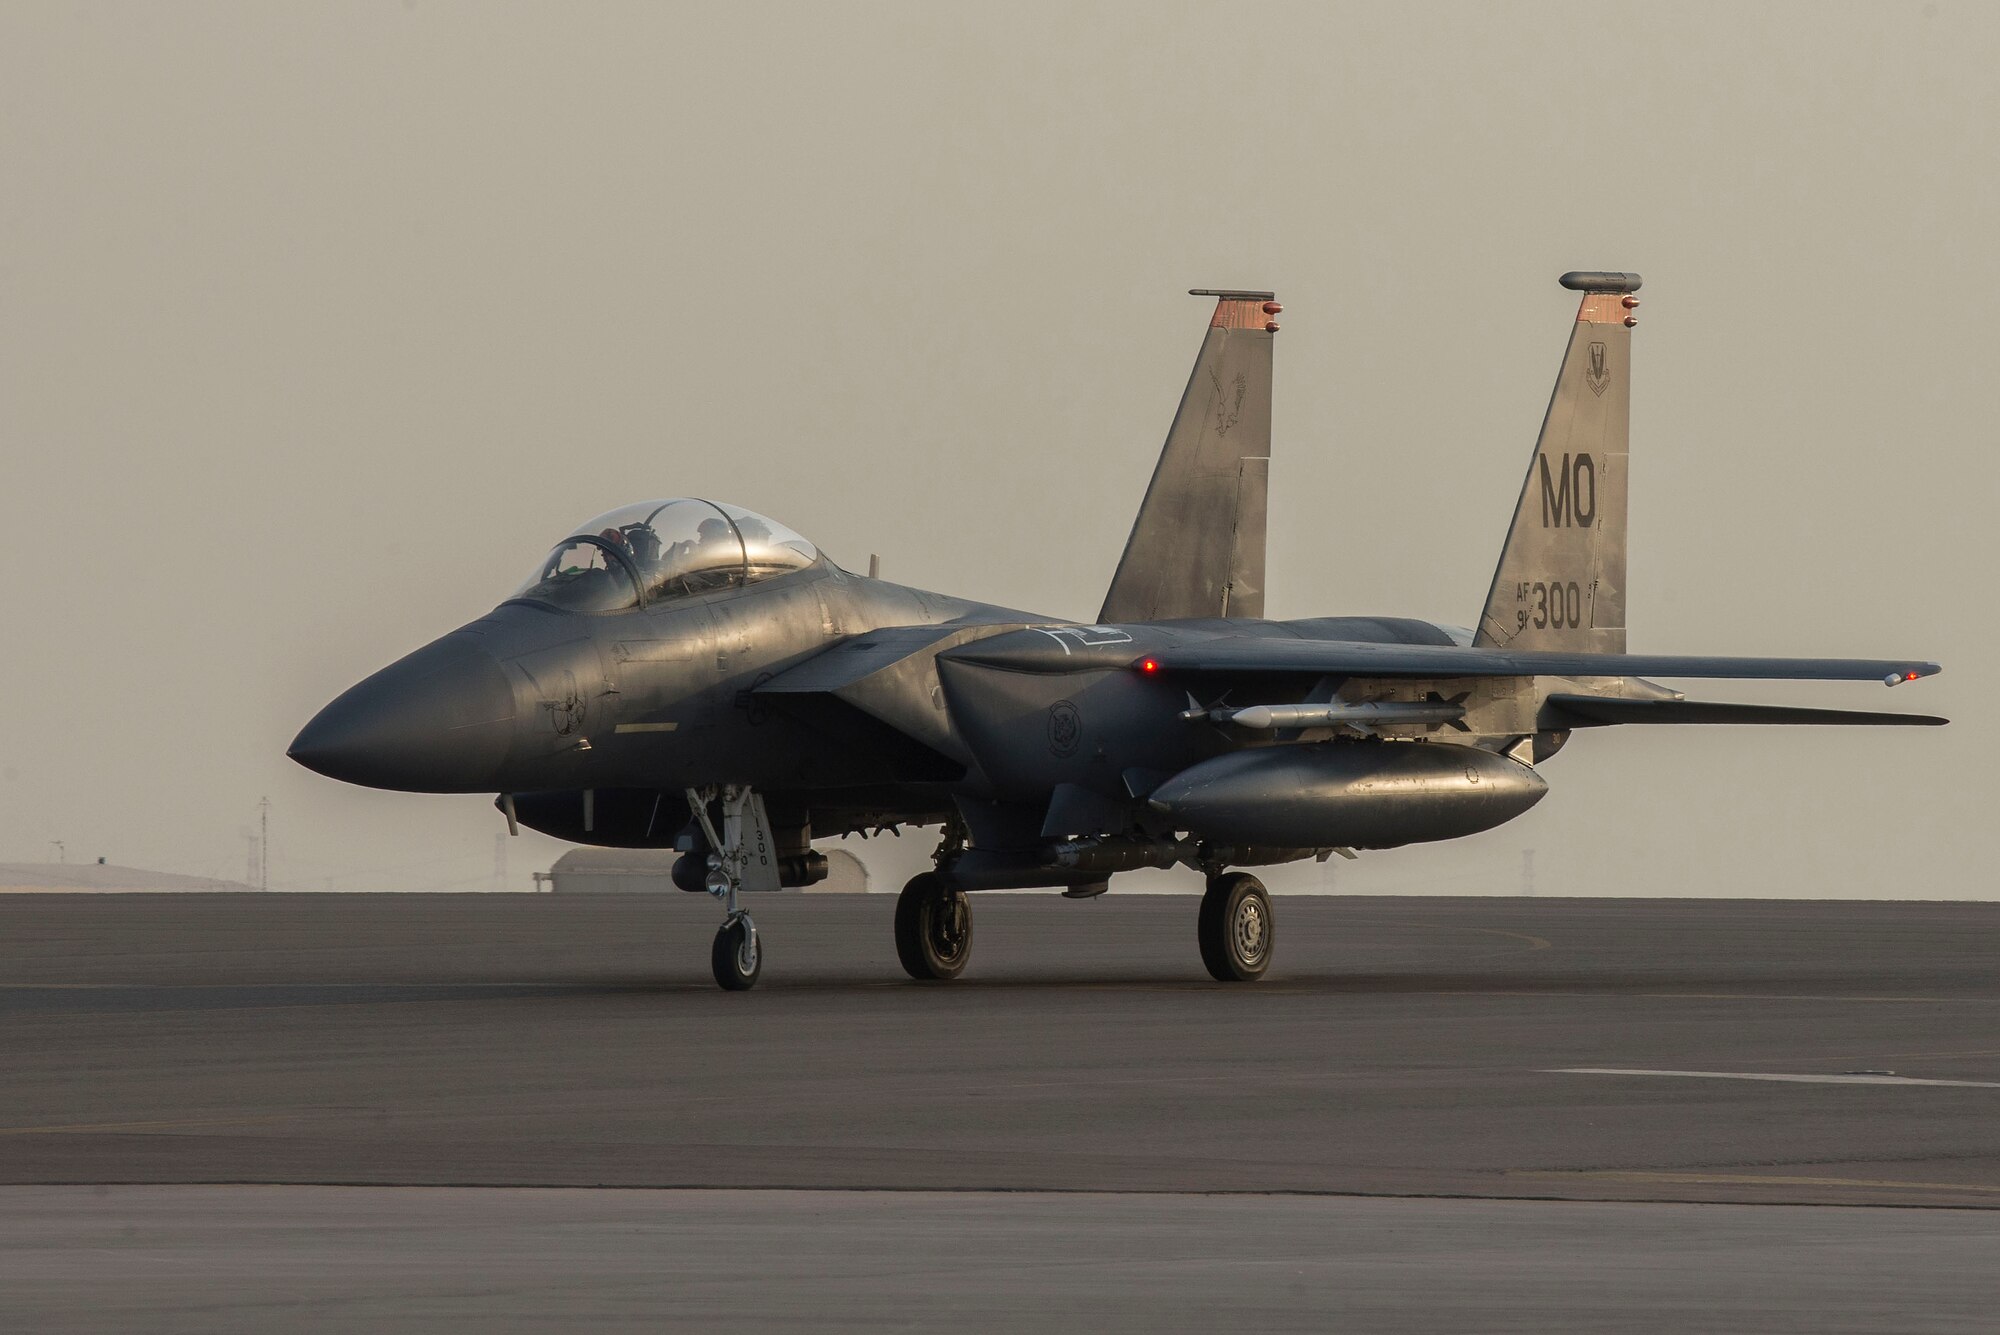 A U.S. Air Force F-15E Strike Eagle assigned to the 332nd Air Expeditionary Wing taxis on the flightline upon landing at Al Dhafra Air Base, United Arab Emirates, Nov. 17, 2020.